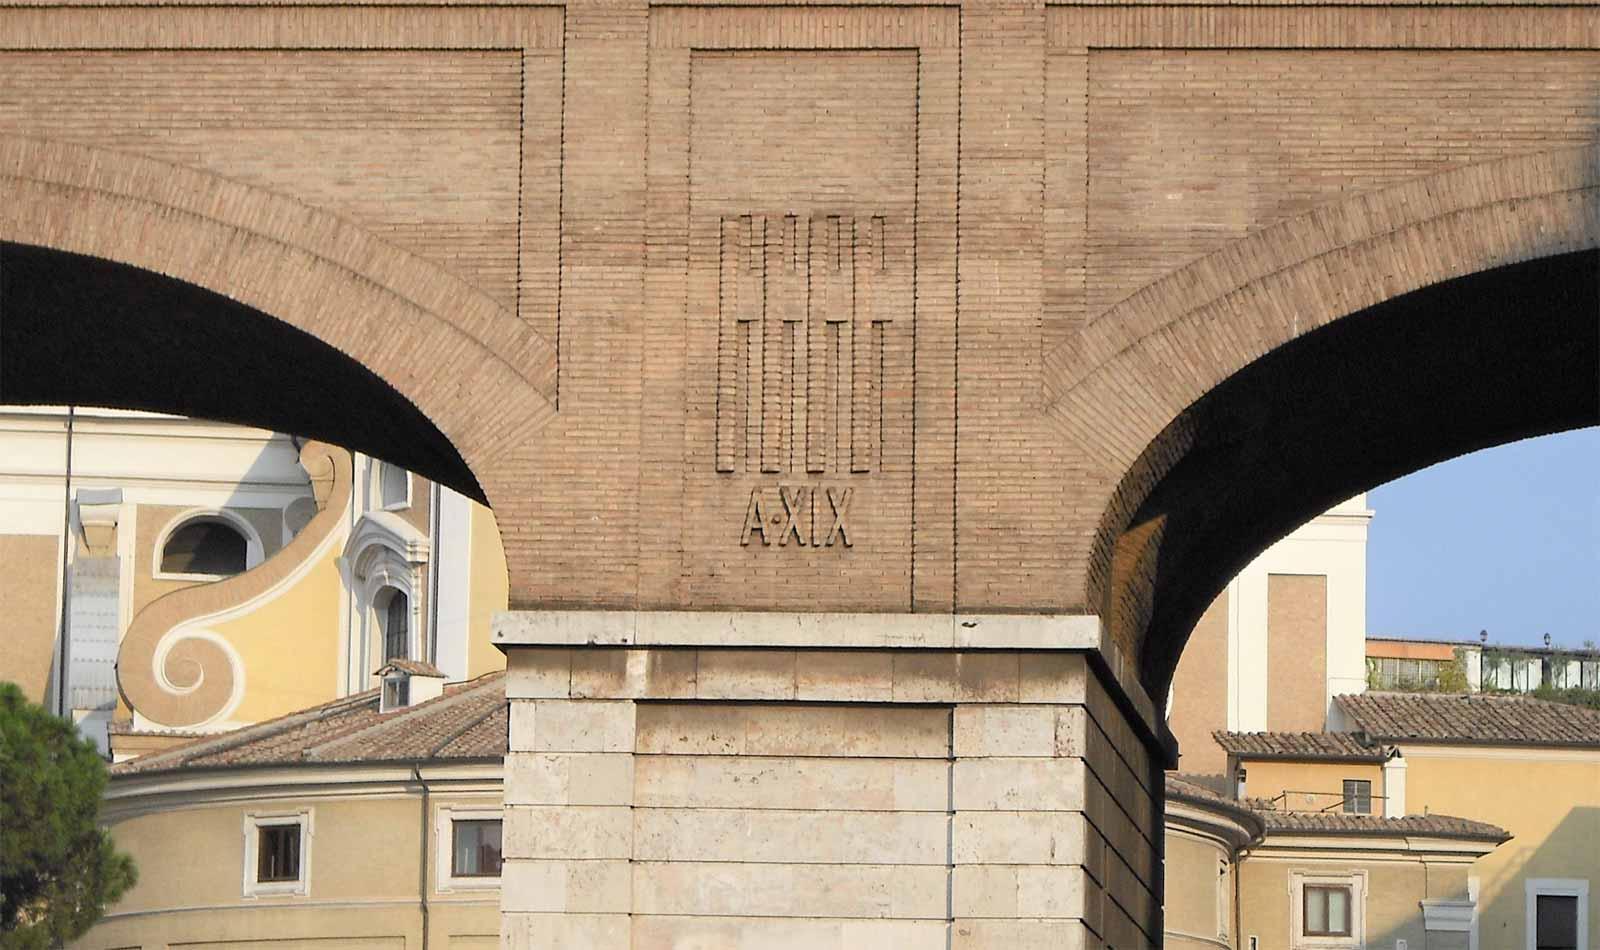 Year 19 in Roman numerals (Anno XIX) below the image of fasces in brick.